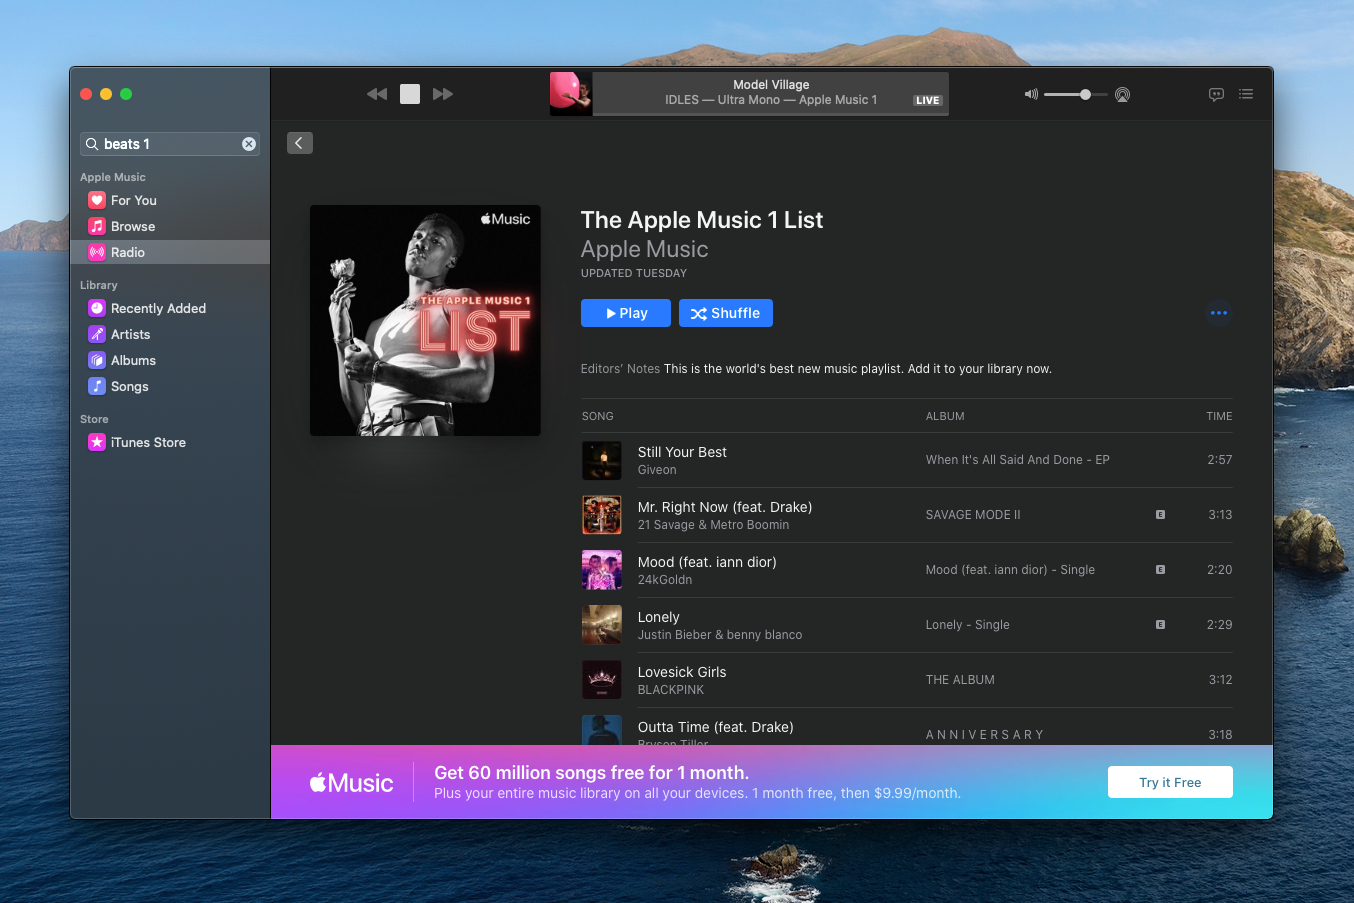 Apple Music vs.  Music: Which music service wins?